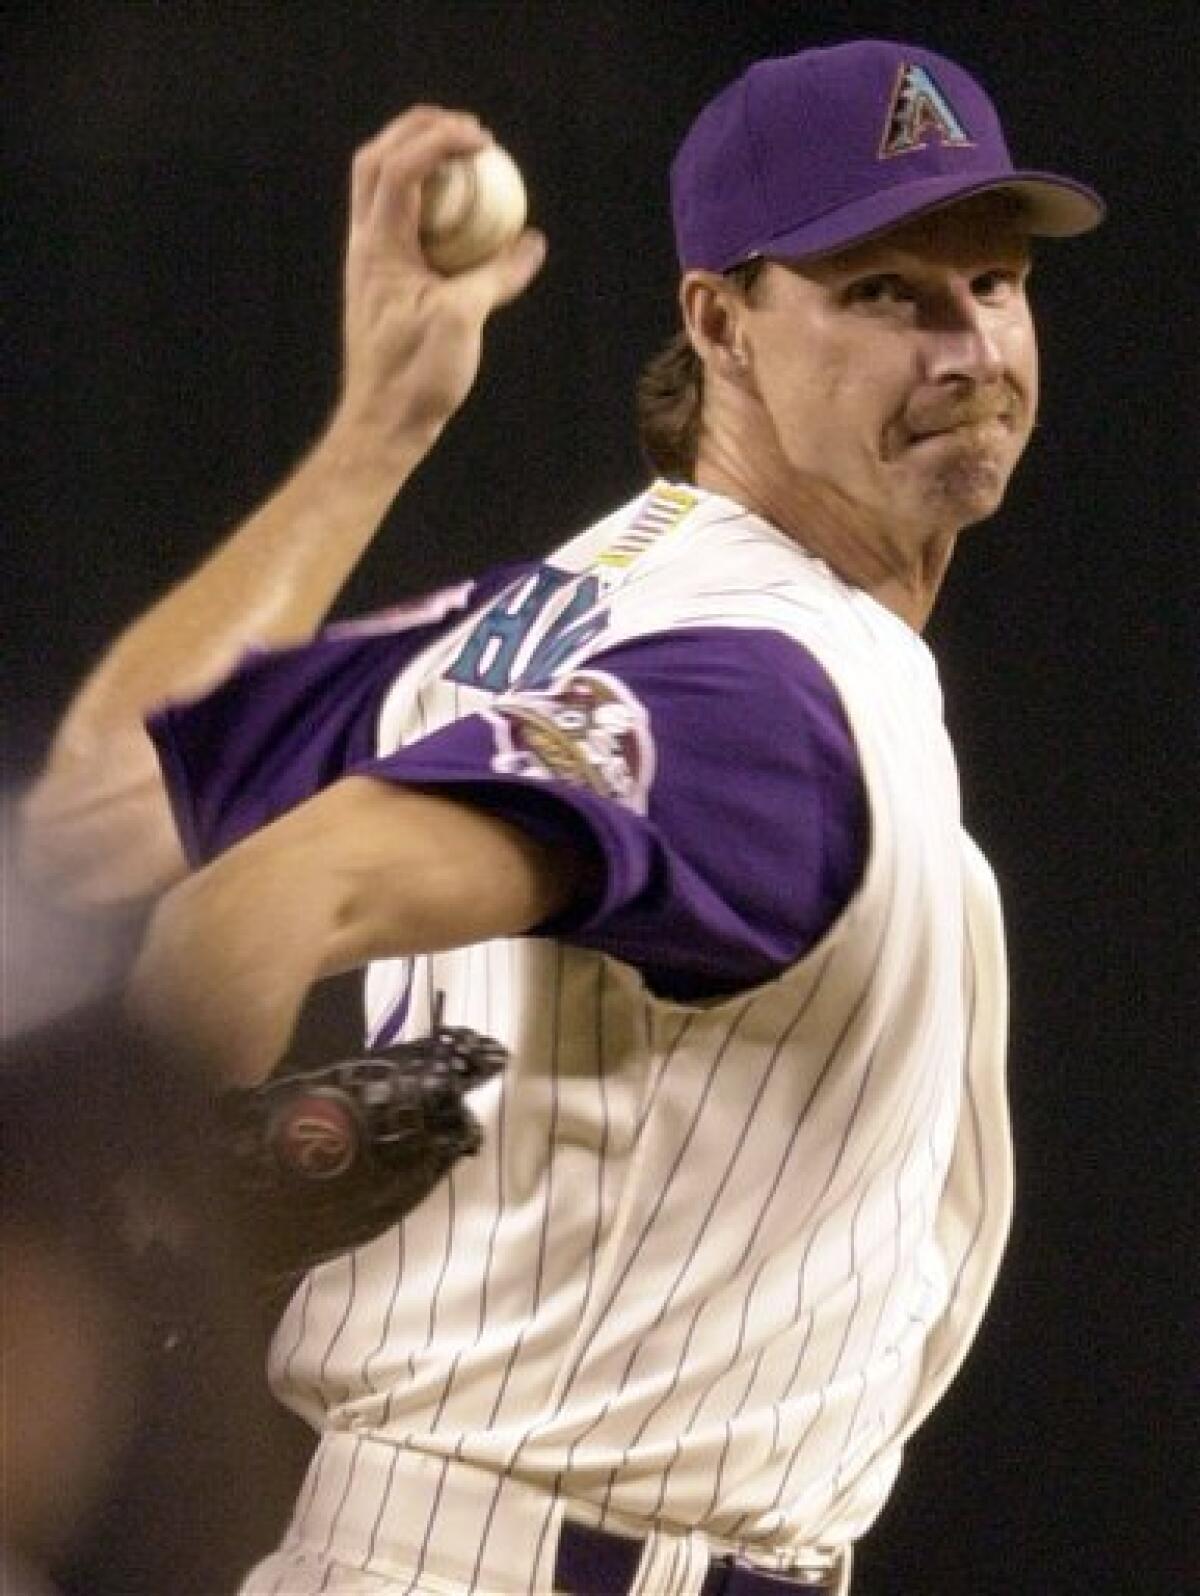 FILE - In this Nov. 3, 2001, file photo, Arizona Diamondbacks pitcher Randy Johnson throws against the New York Yankees in the first inning of Game 6 of baseball's World Series at Bank One Ballpark in Phoenix. Johnson is retiring after 22 major league seasons. The Big Unit, an overpowering lefty who last June became the 24th pitcher in big league history to win 300 games, made the expected announcement on a conference call on Tuesday, Jan. 5, 2010. (AP Photo/Matt York, File)